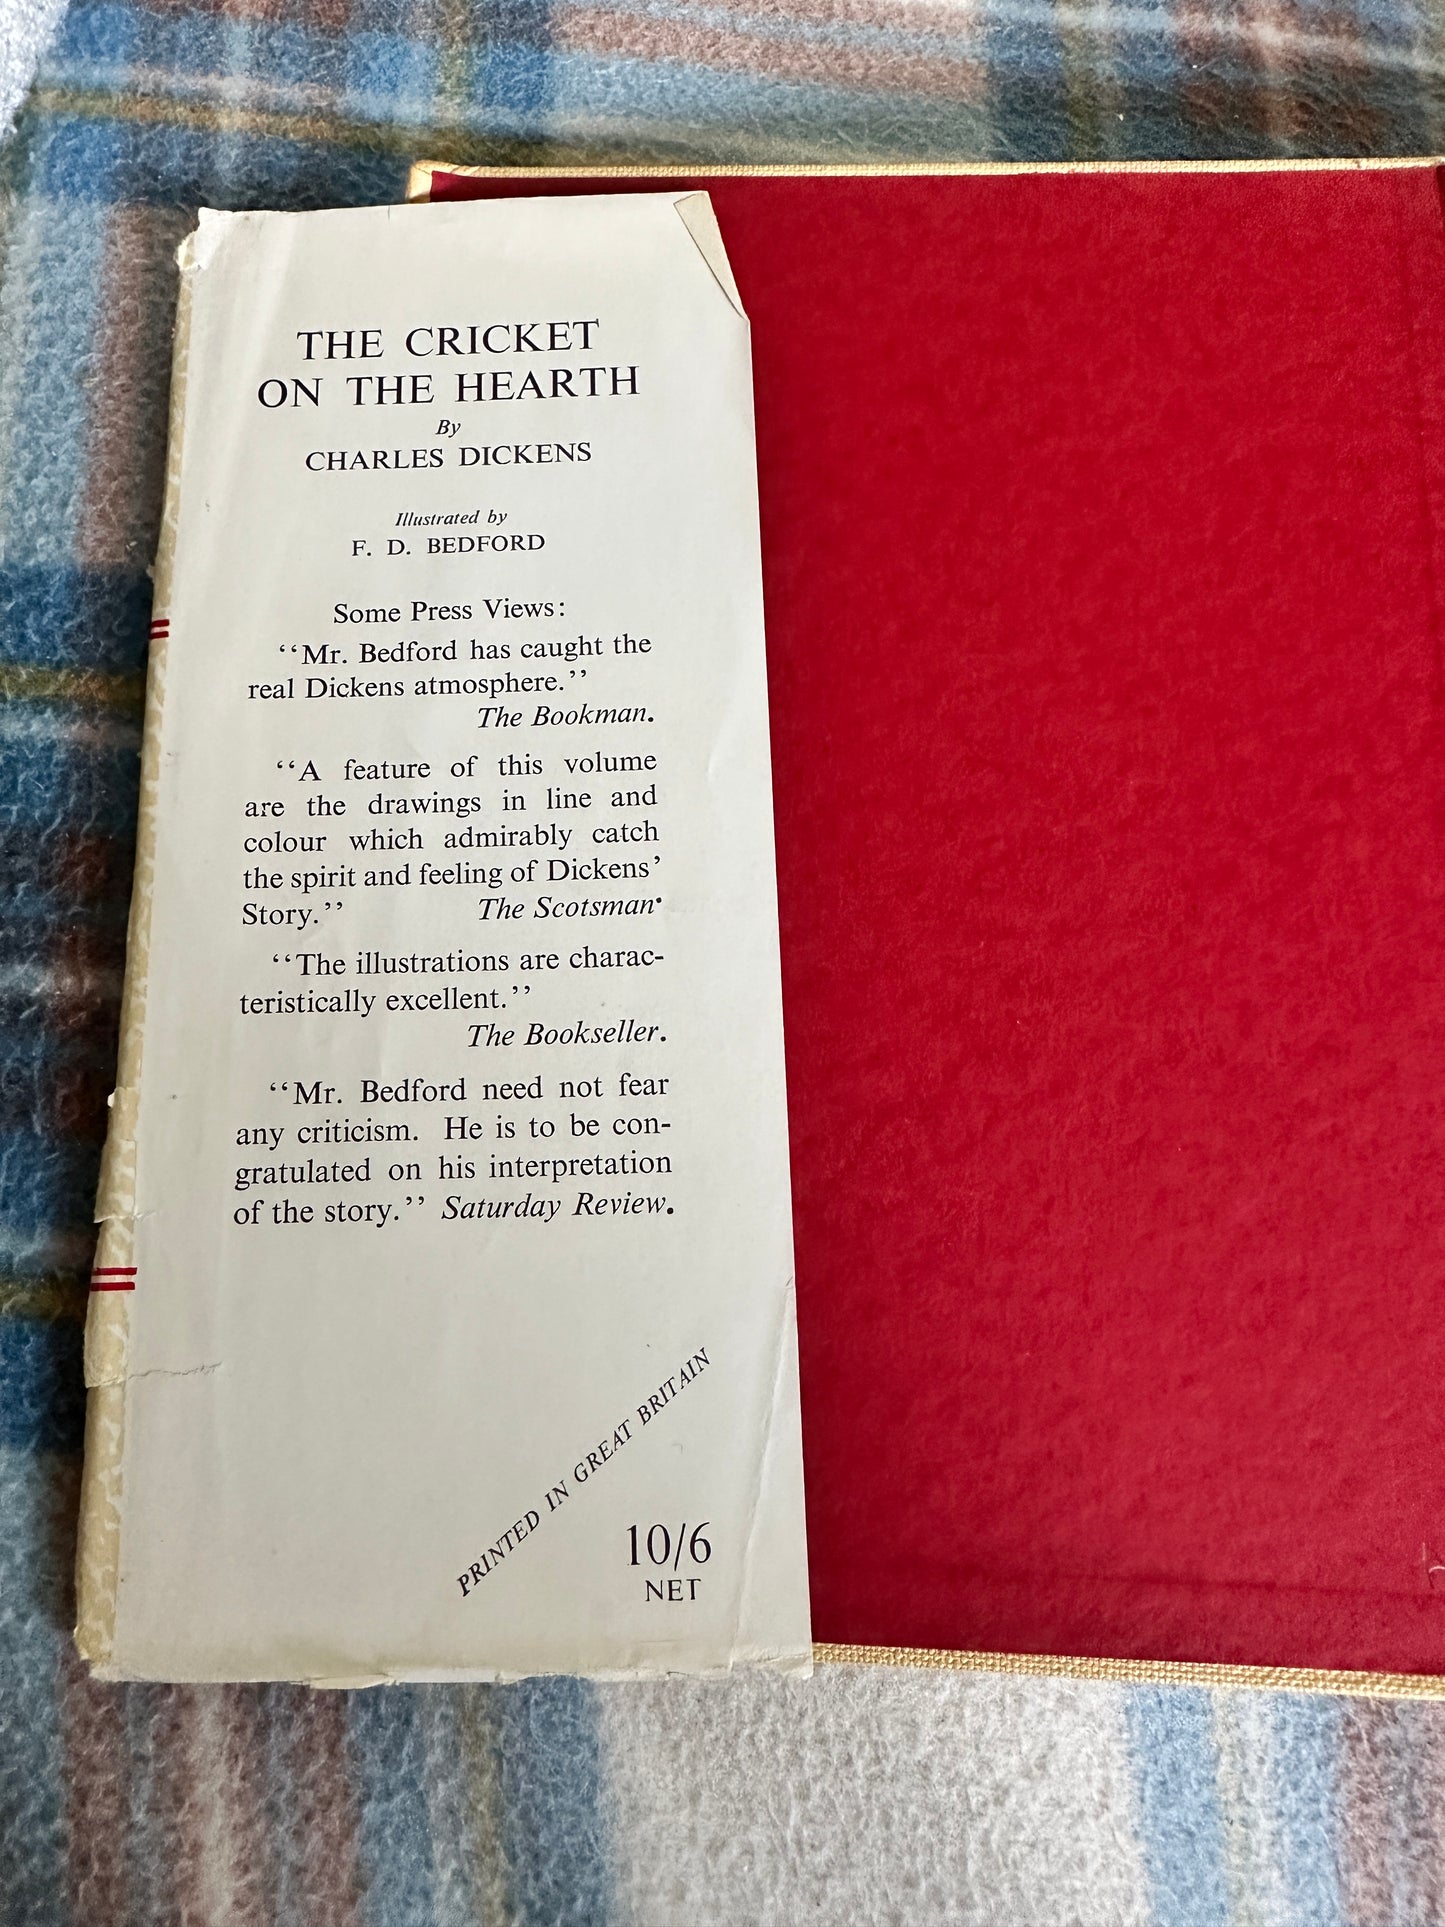 The Cricket On The Hearth - Charles Dickens(F.D. Bedford illustration) Frederick Warne & Co Ltd